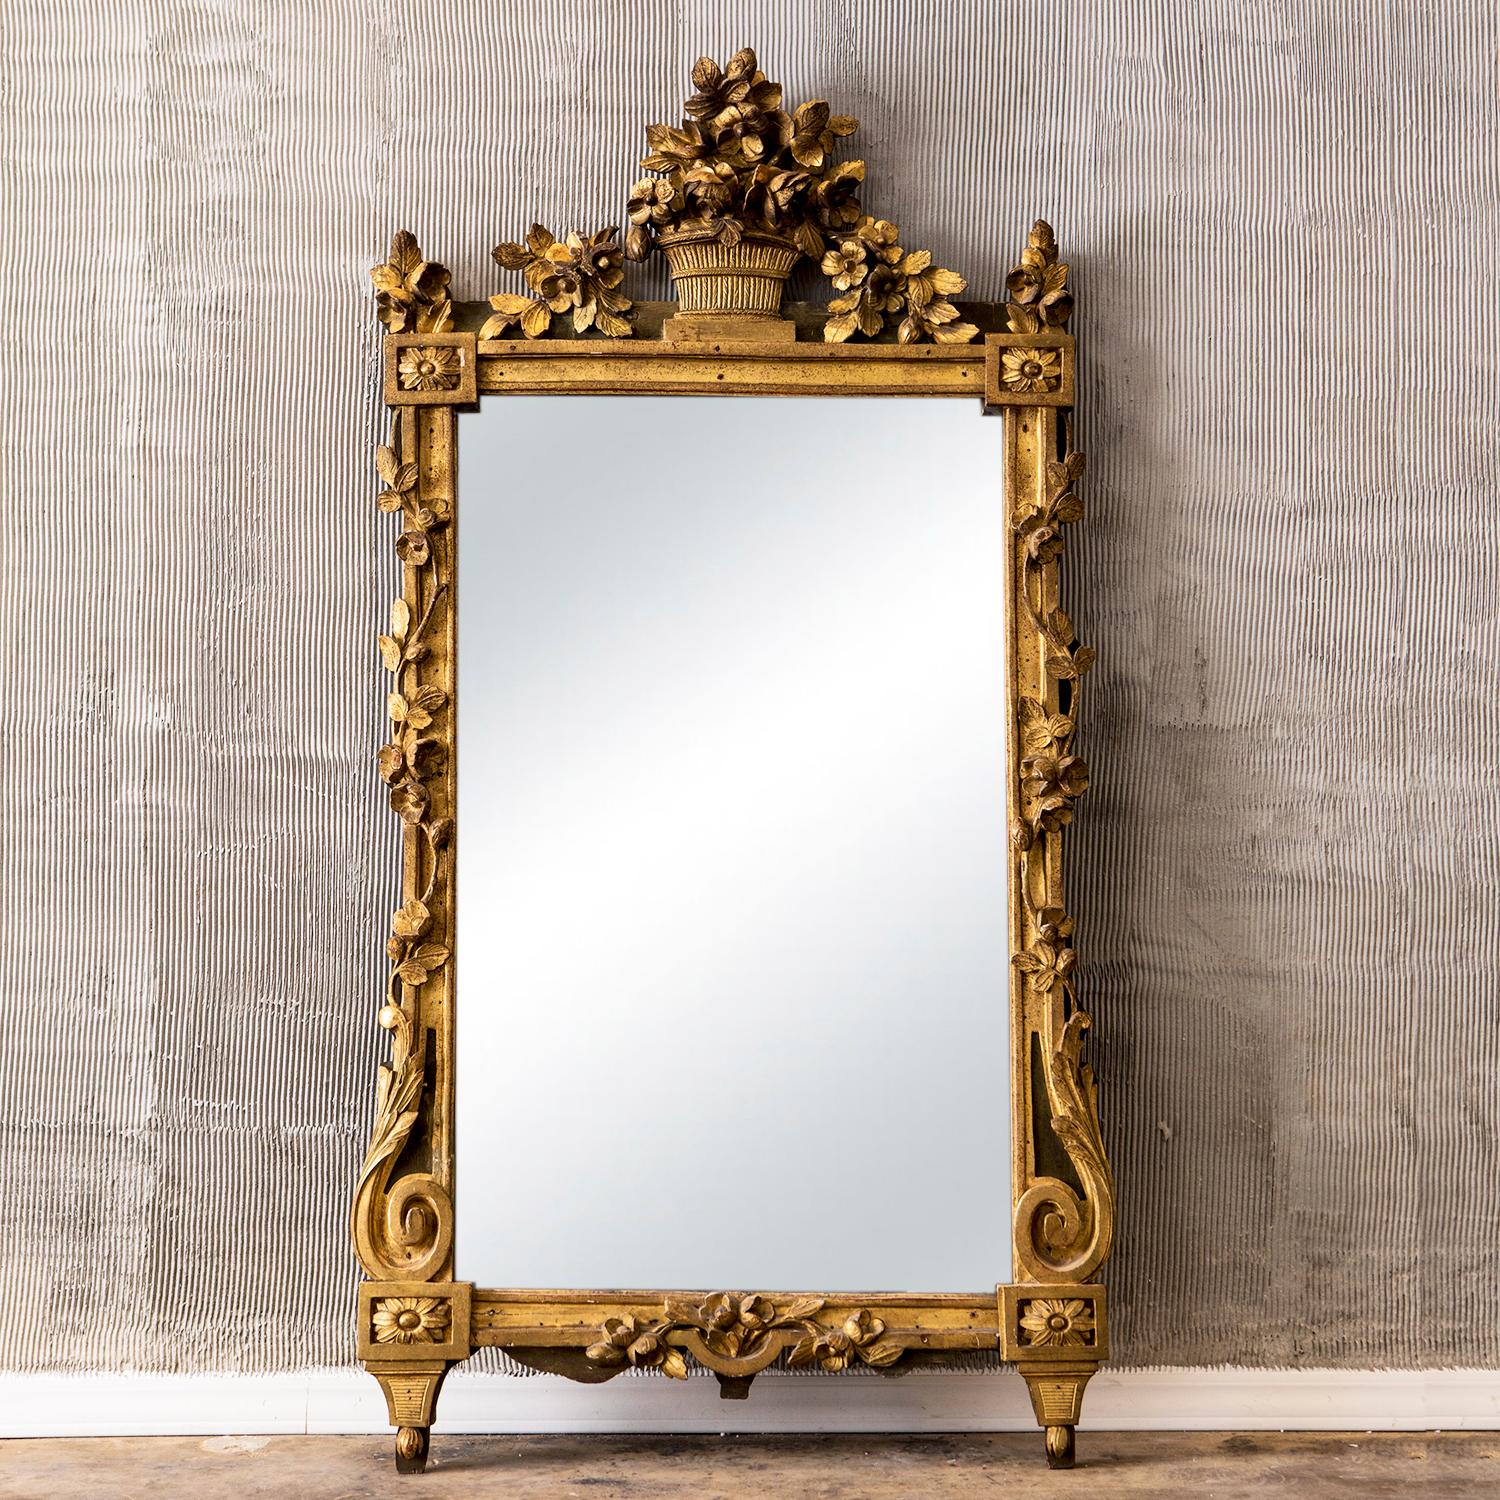 An antique rectangular mirror inscribed in a Pinewwood frame, gilded, the pediment formed by an openwork flower basket spilling sinuous garlands of flowers and foliage on either side, in good condition. The mirror is consisting its original mirror